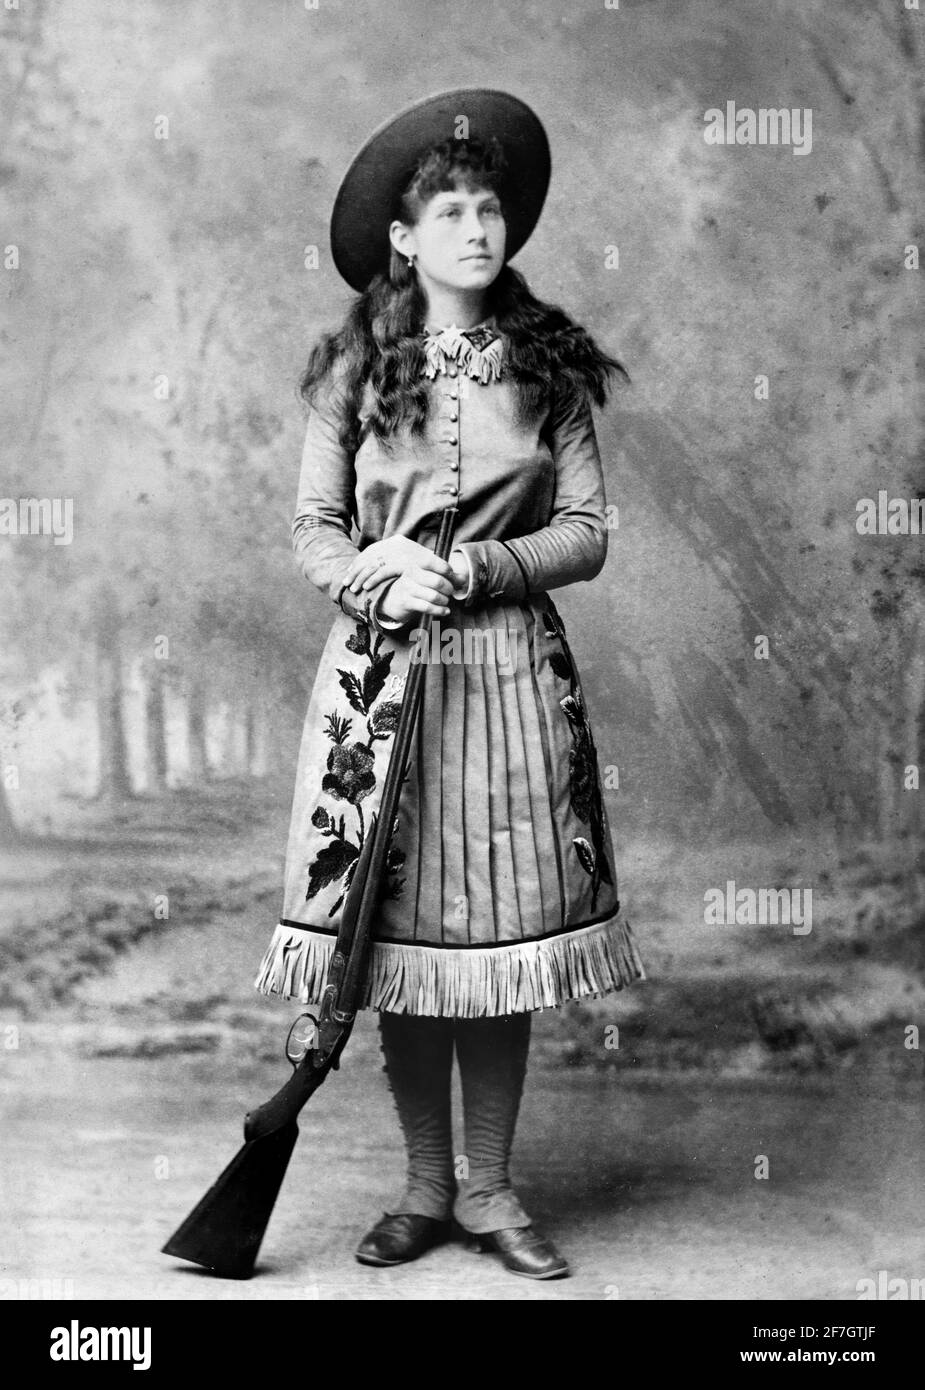 Annie Oakley. Portrait of the famous American sharpshooter, Annie Oakley  (b. Phoebe Ann Mosey, 1860-1926) . Photo by John Wood, c. 1885 Stock Photo